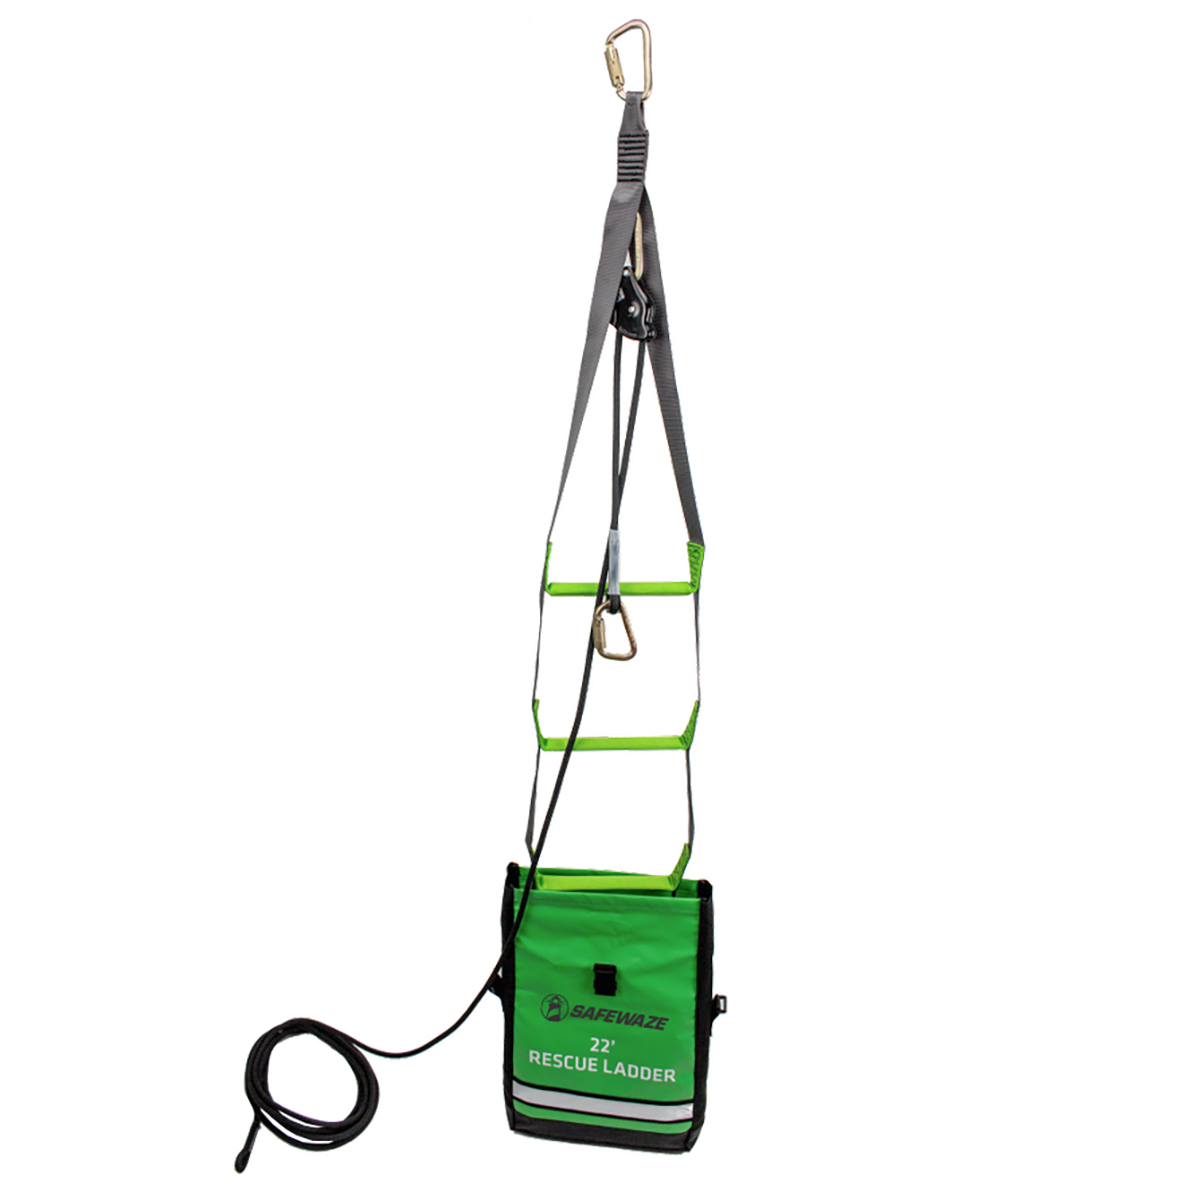 22ft Rescue Ladder with Belay - Utility and Pocket Knives